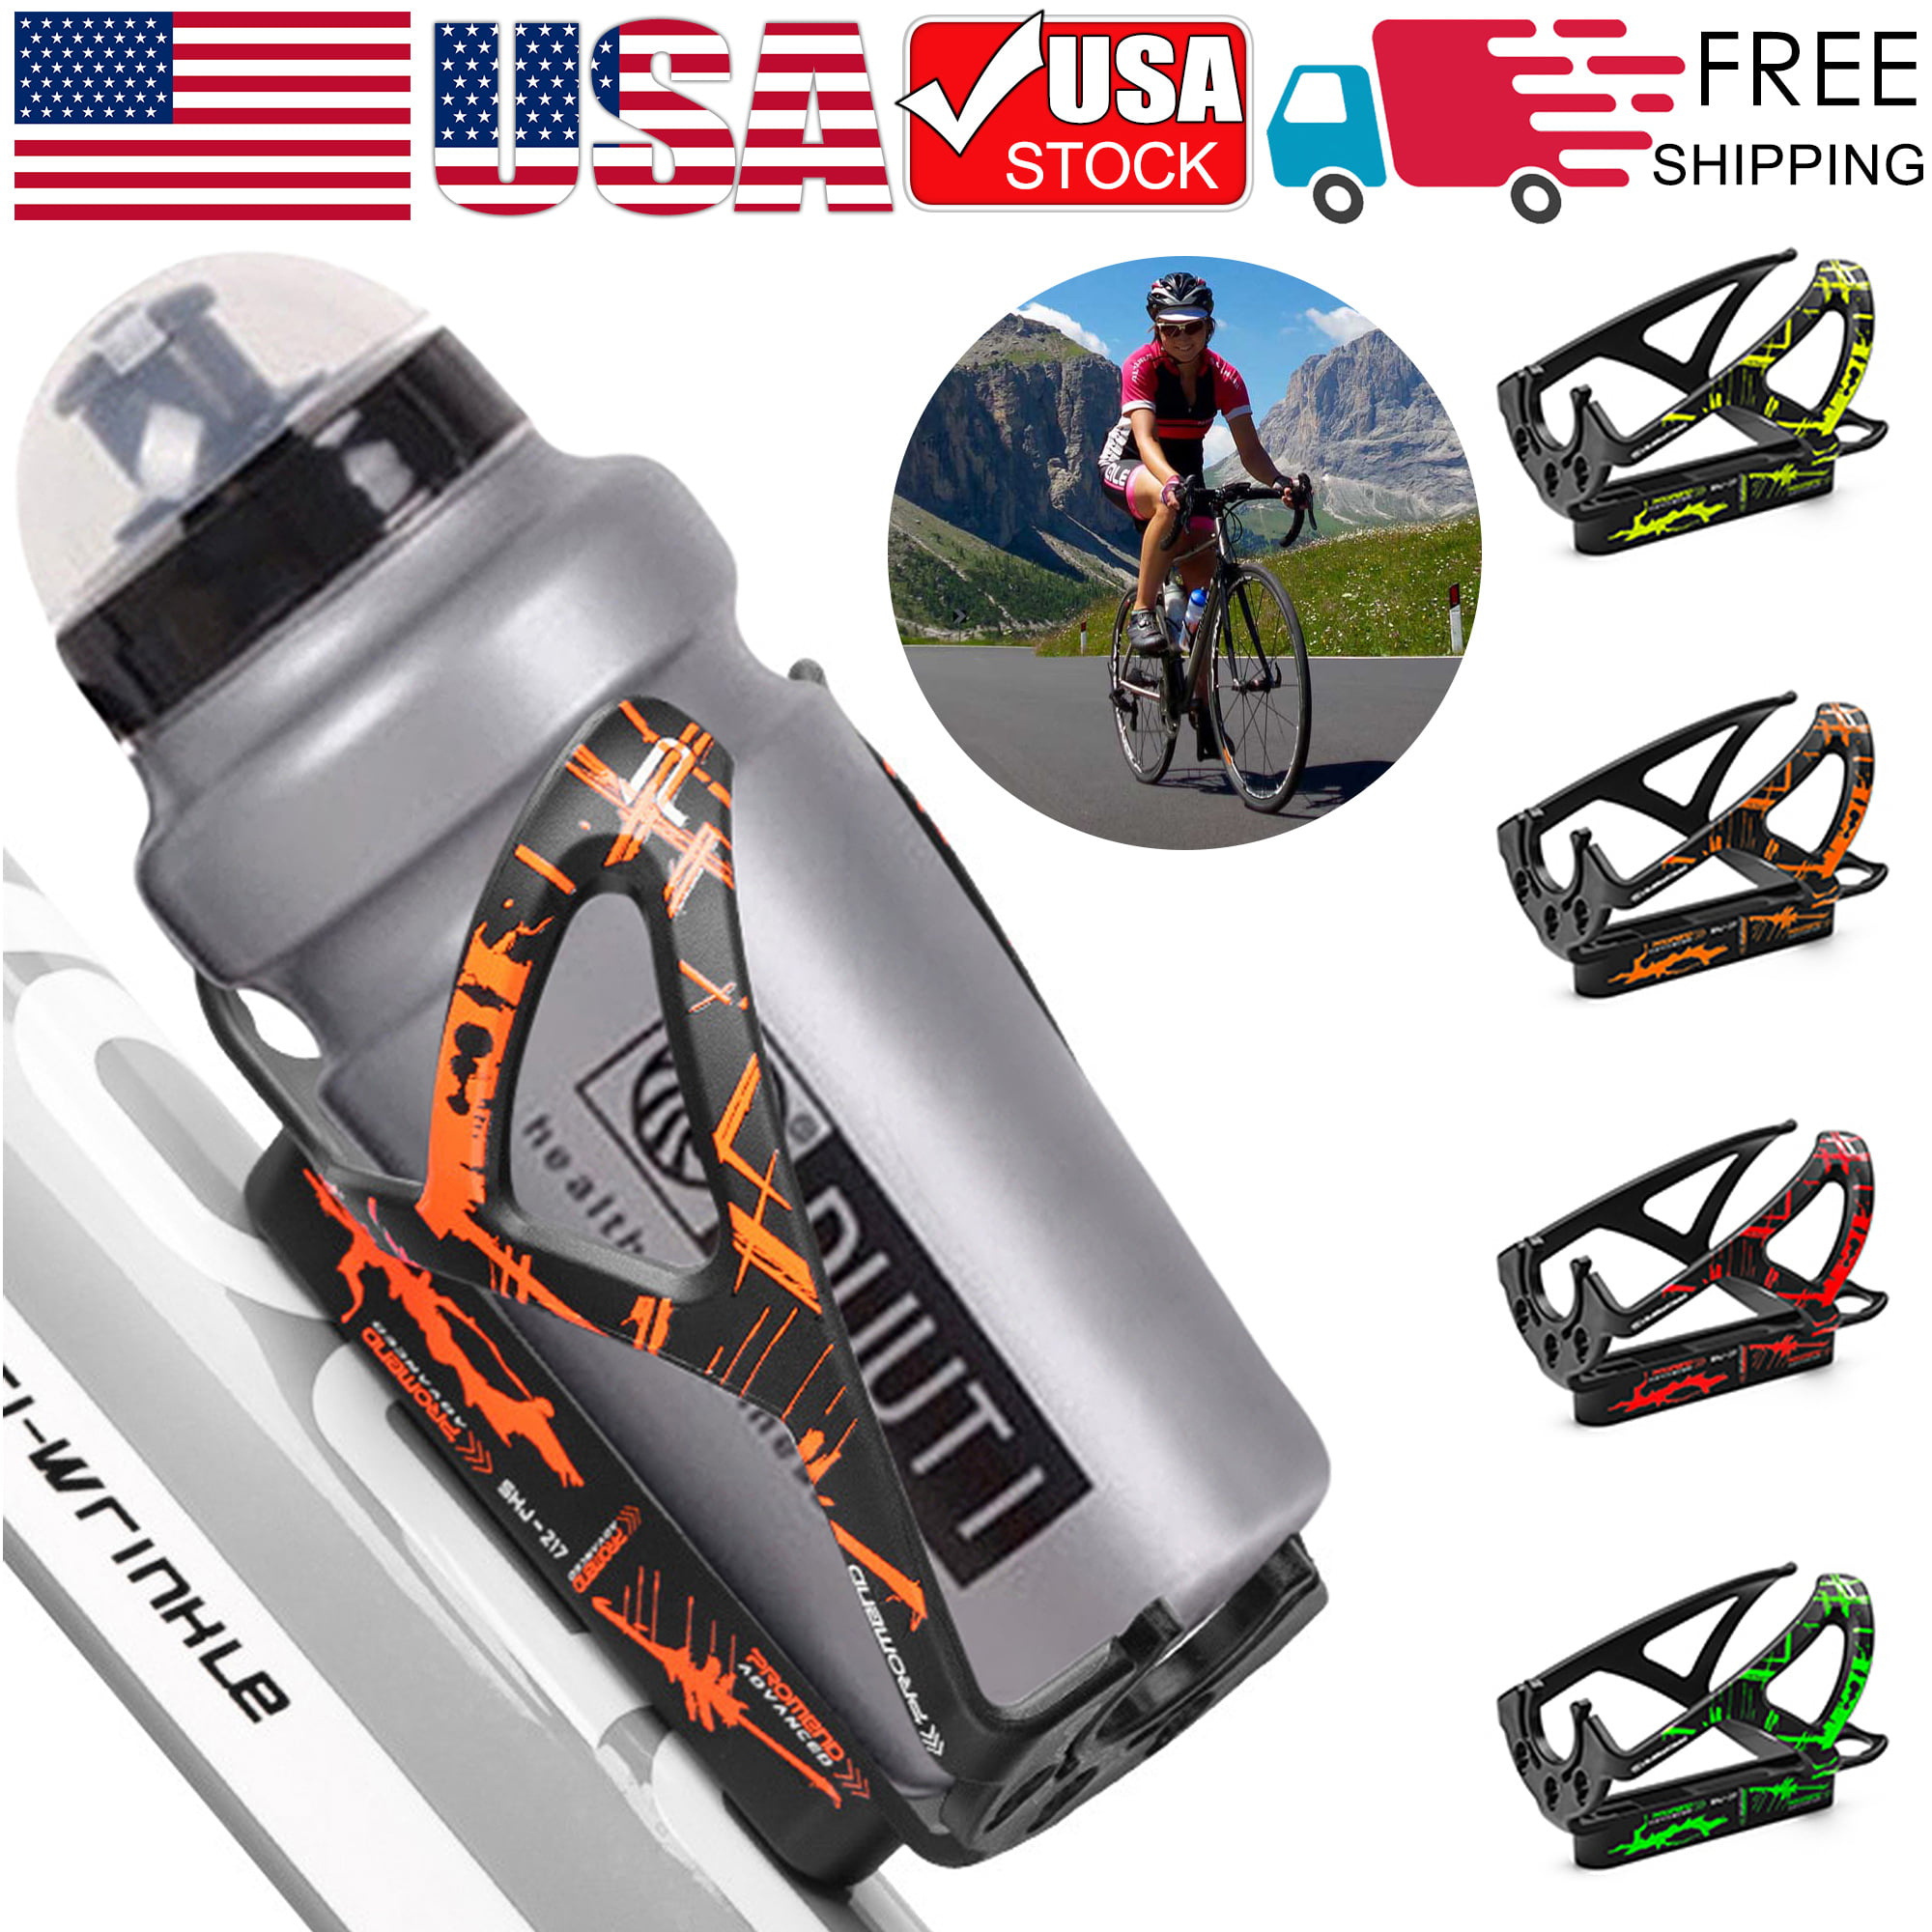 Water Bottle Holder Bracket Sports Bike Bicycle Cycling Drink Rack Cages 